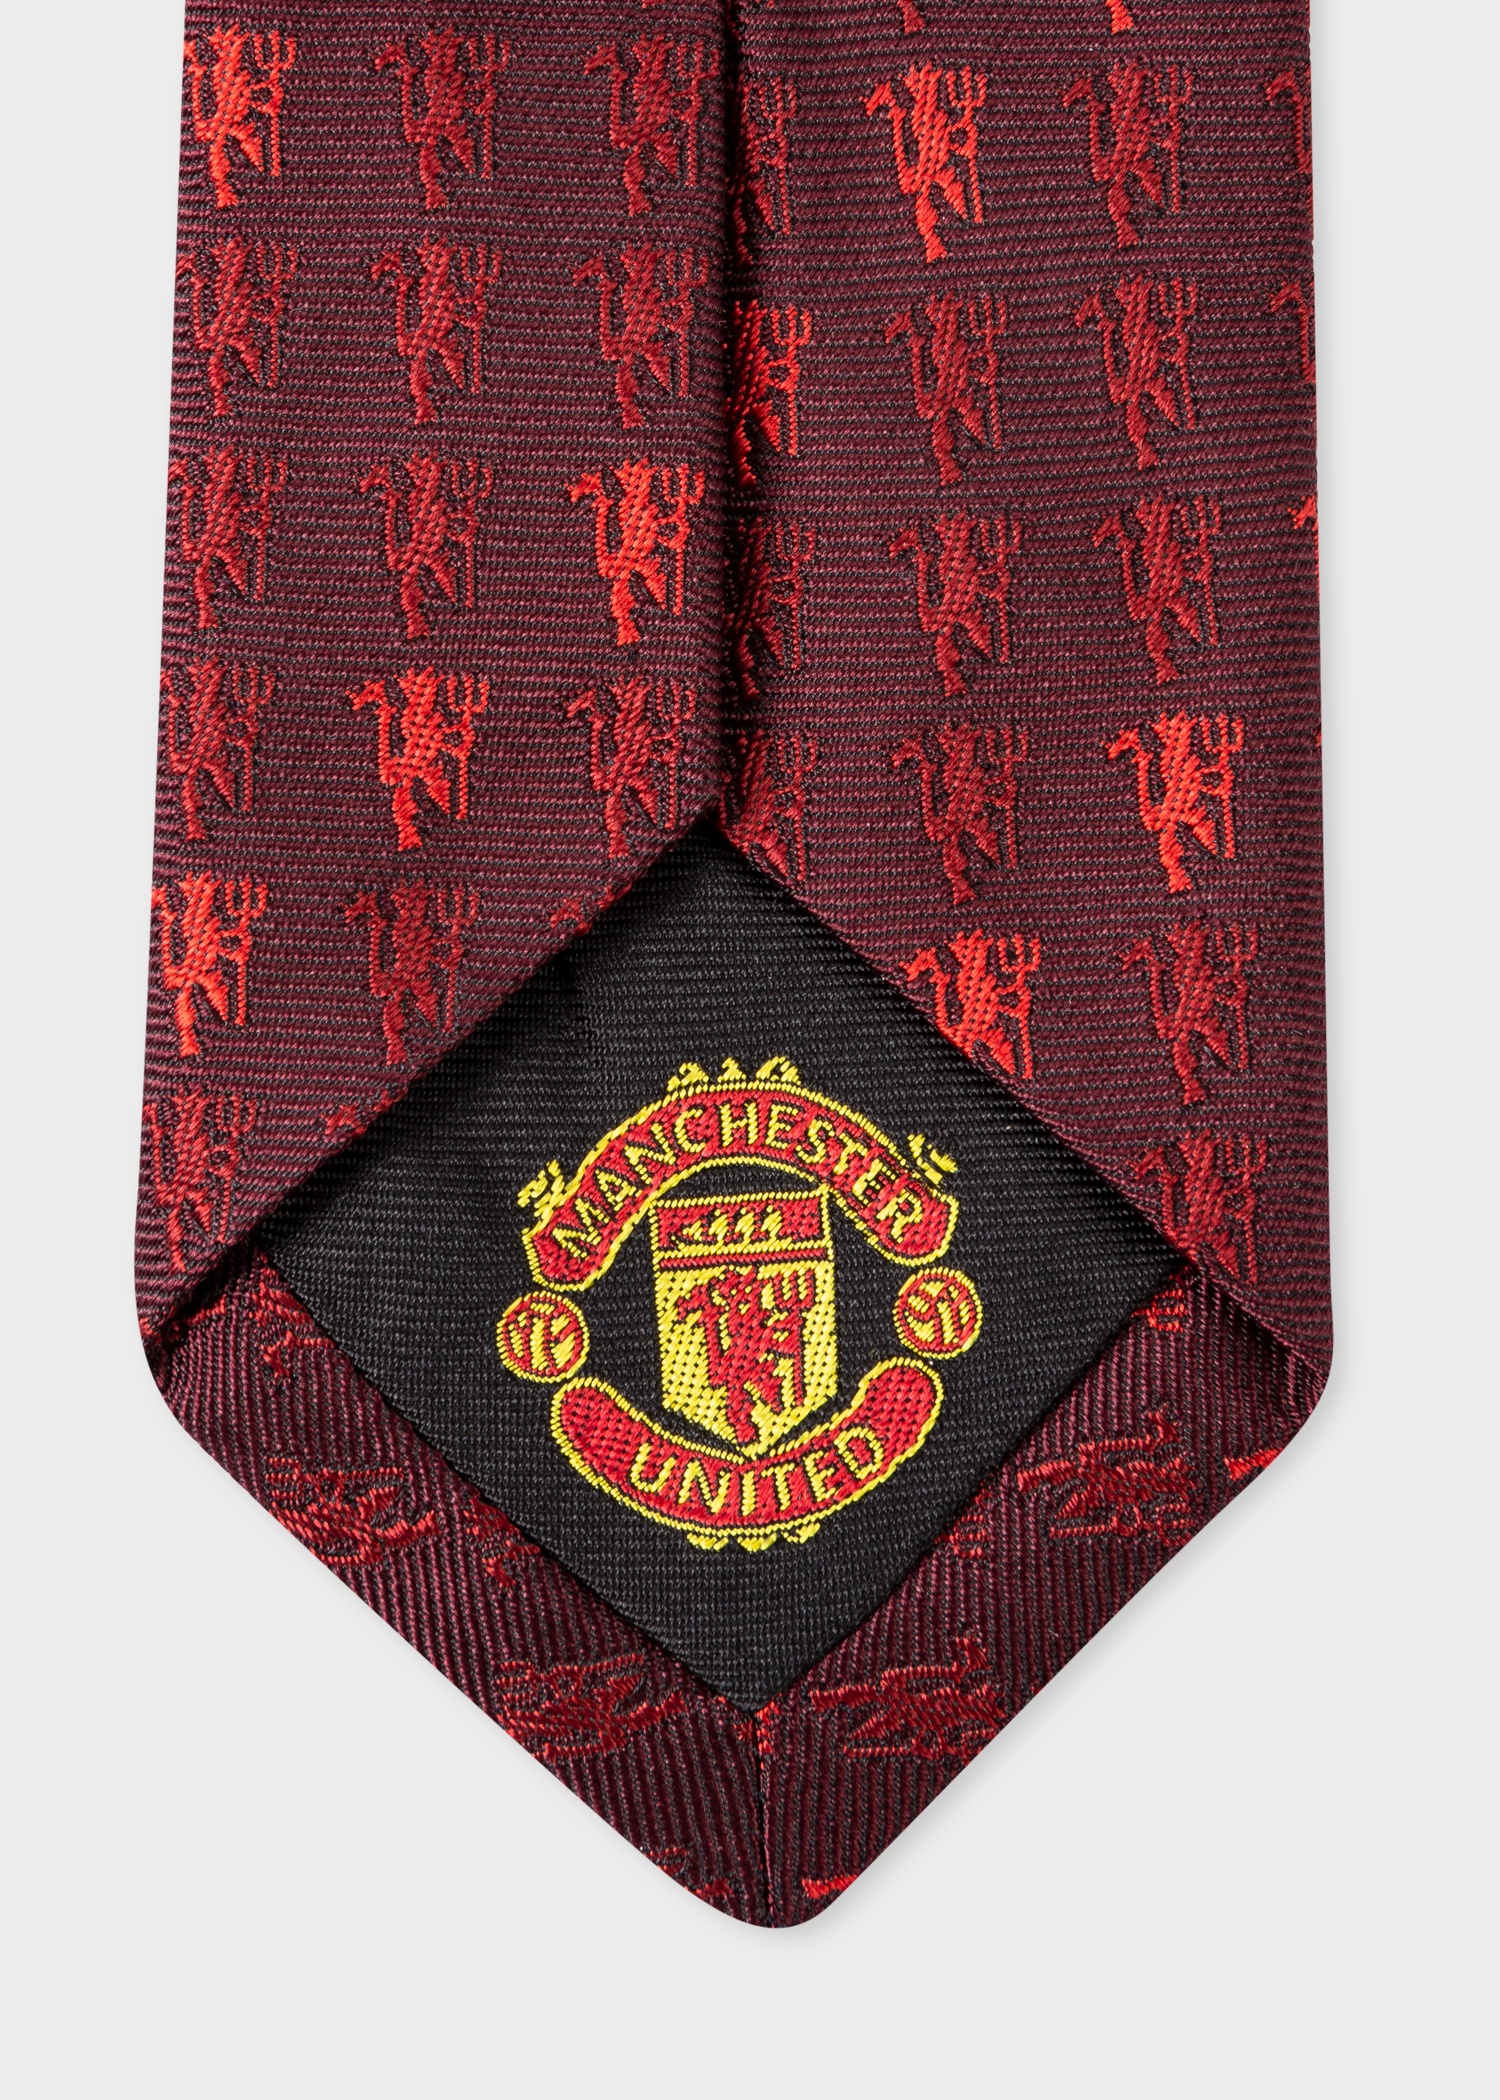 Paul Smith & Manchester United - 'Red Devil' Narrow Silk Tie - 3